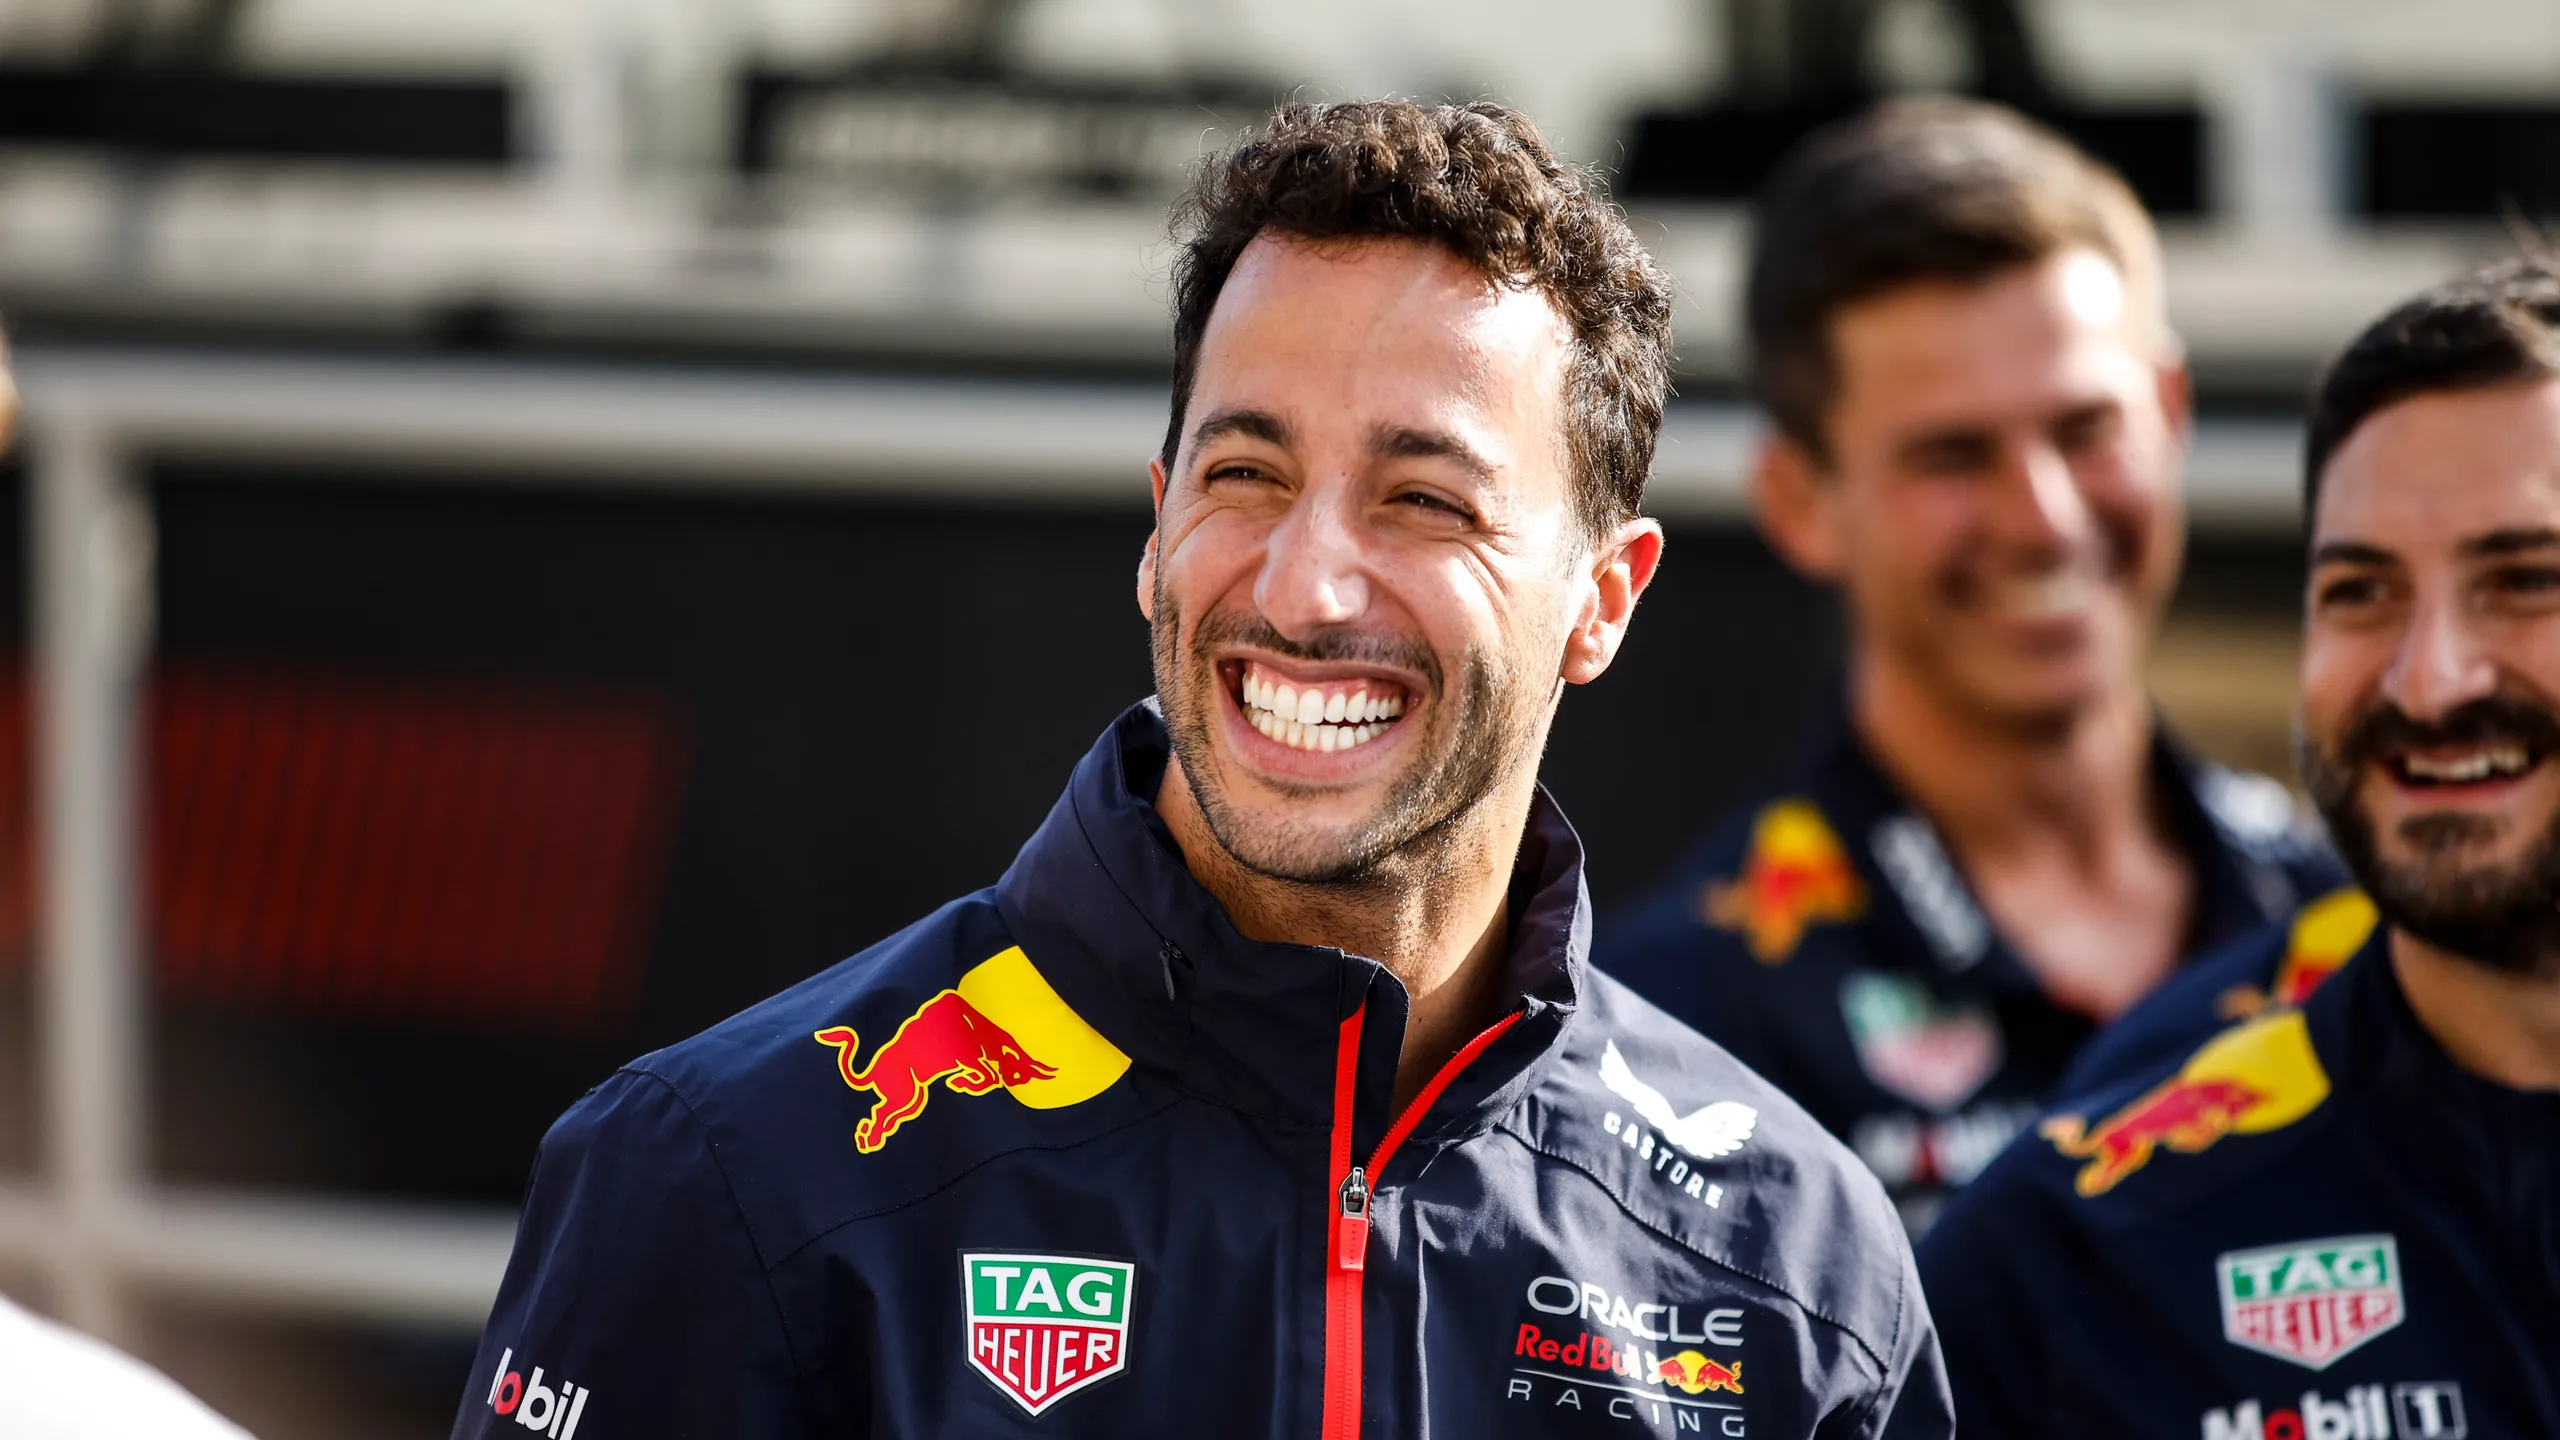 Ricciardo Upset by Contact with Stroll During F1 Race in China